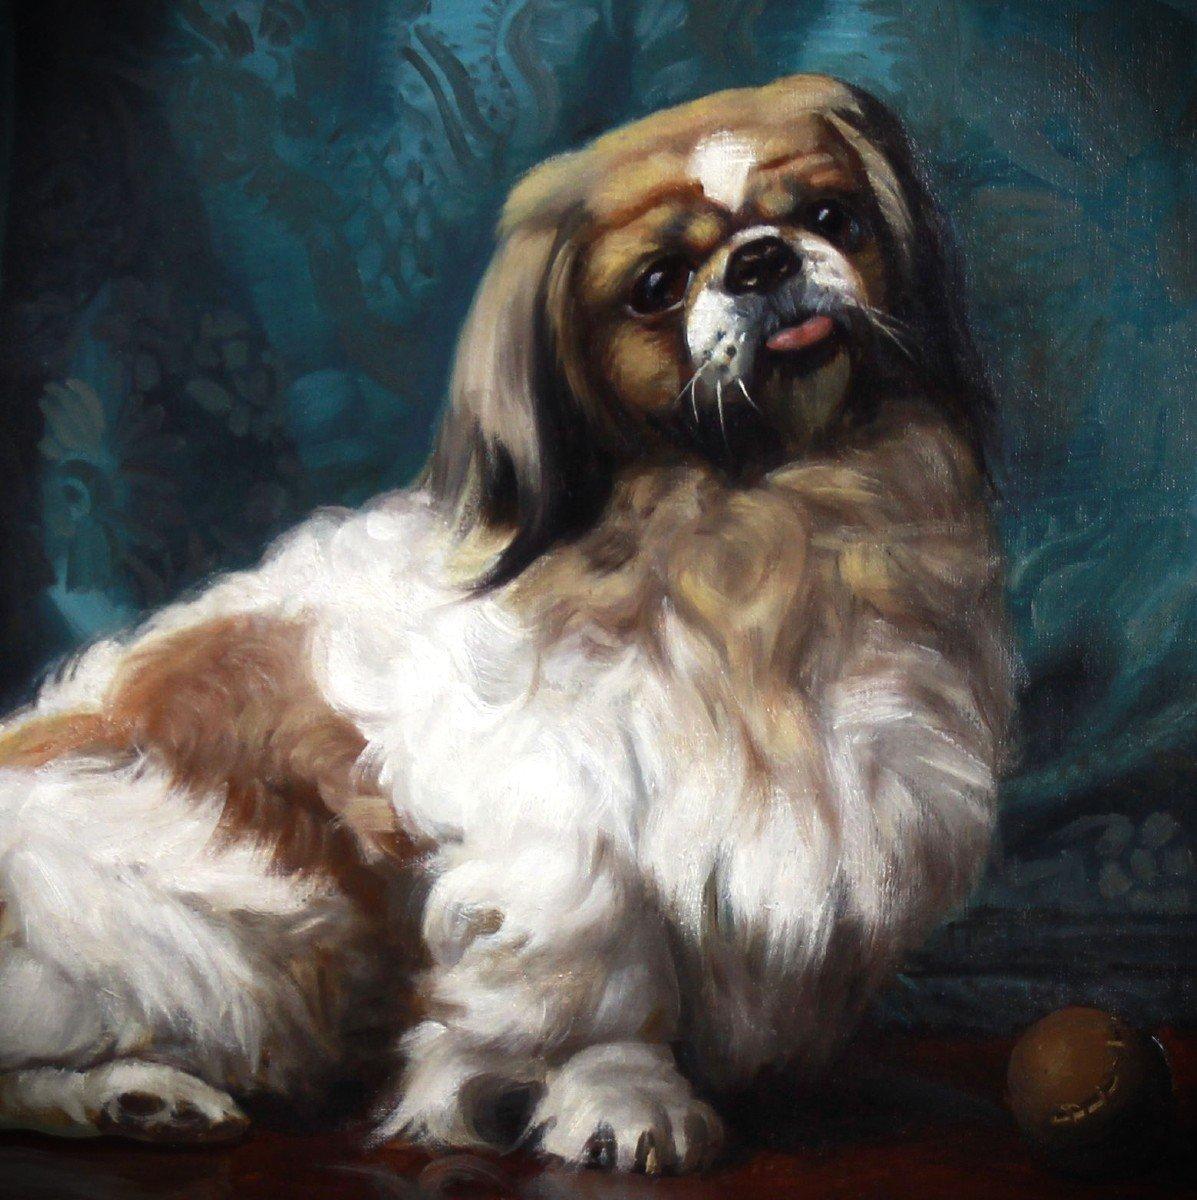 Old oil painting on canvas Portrait of a Pekingese dog breed, this is an oil on canvas from the beginning of the 20th century.
Painted by André Leroux (1911-1997) French school.
Highly decorative and exclusive paintings , for the dog portrait